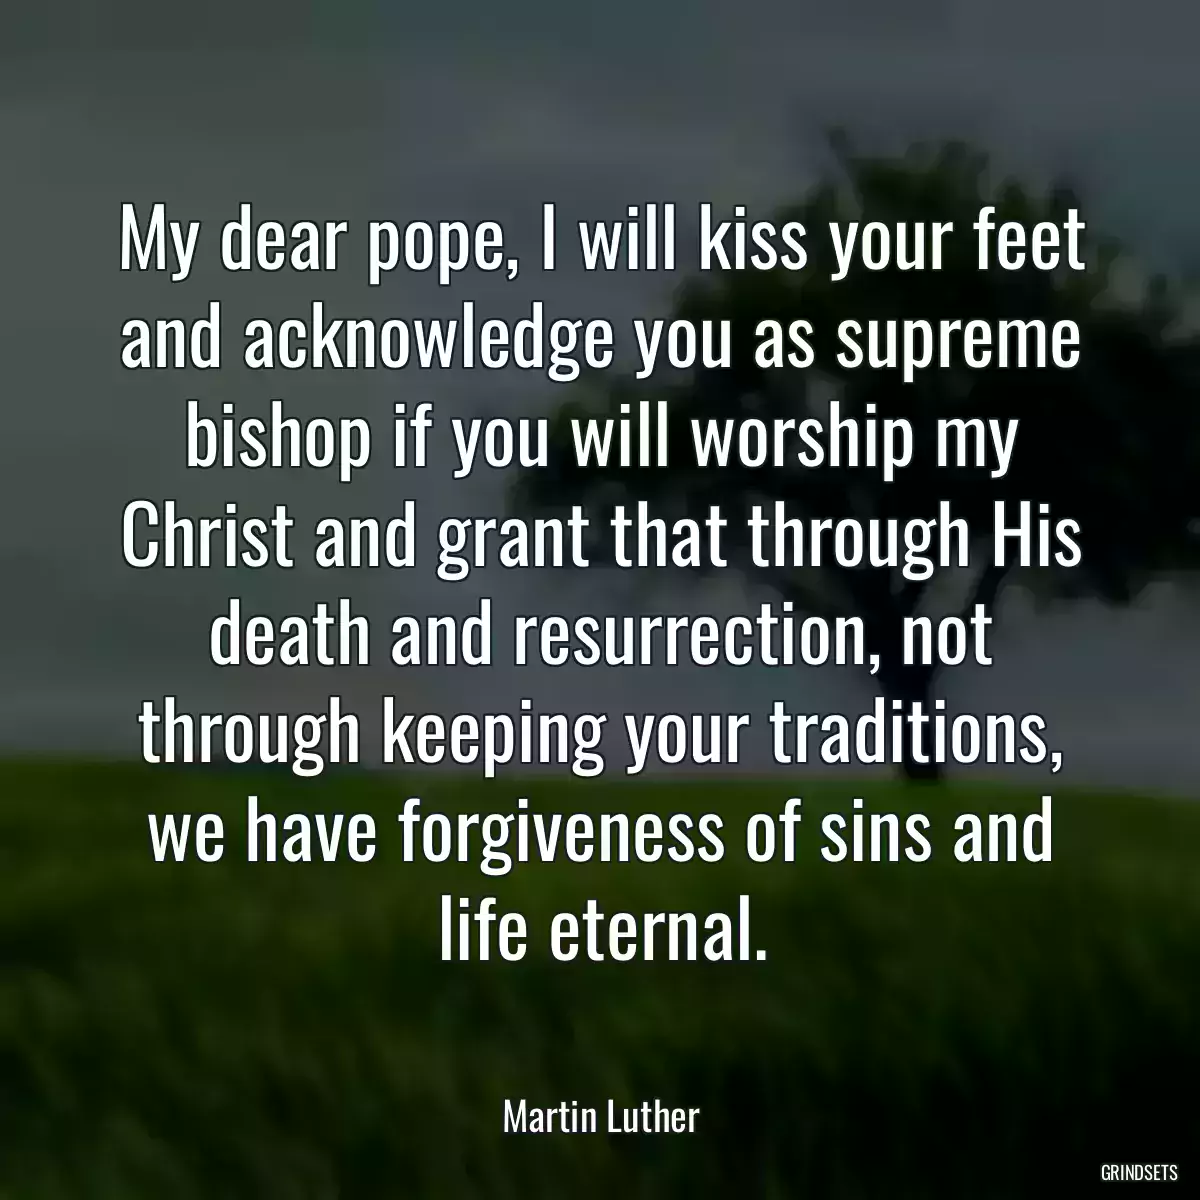 My dear pope, I will kiss your feet and acknowledge you as supreme bishop if you will worship my Christ and grant that through His death and resurrection, not through keeping your traditions, we have forgiveness of sins and life eternal.